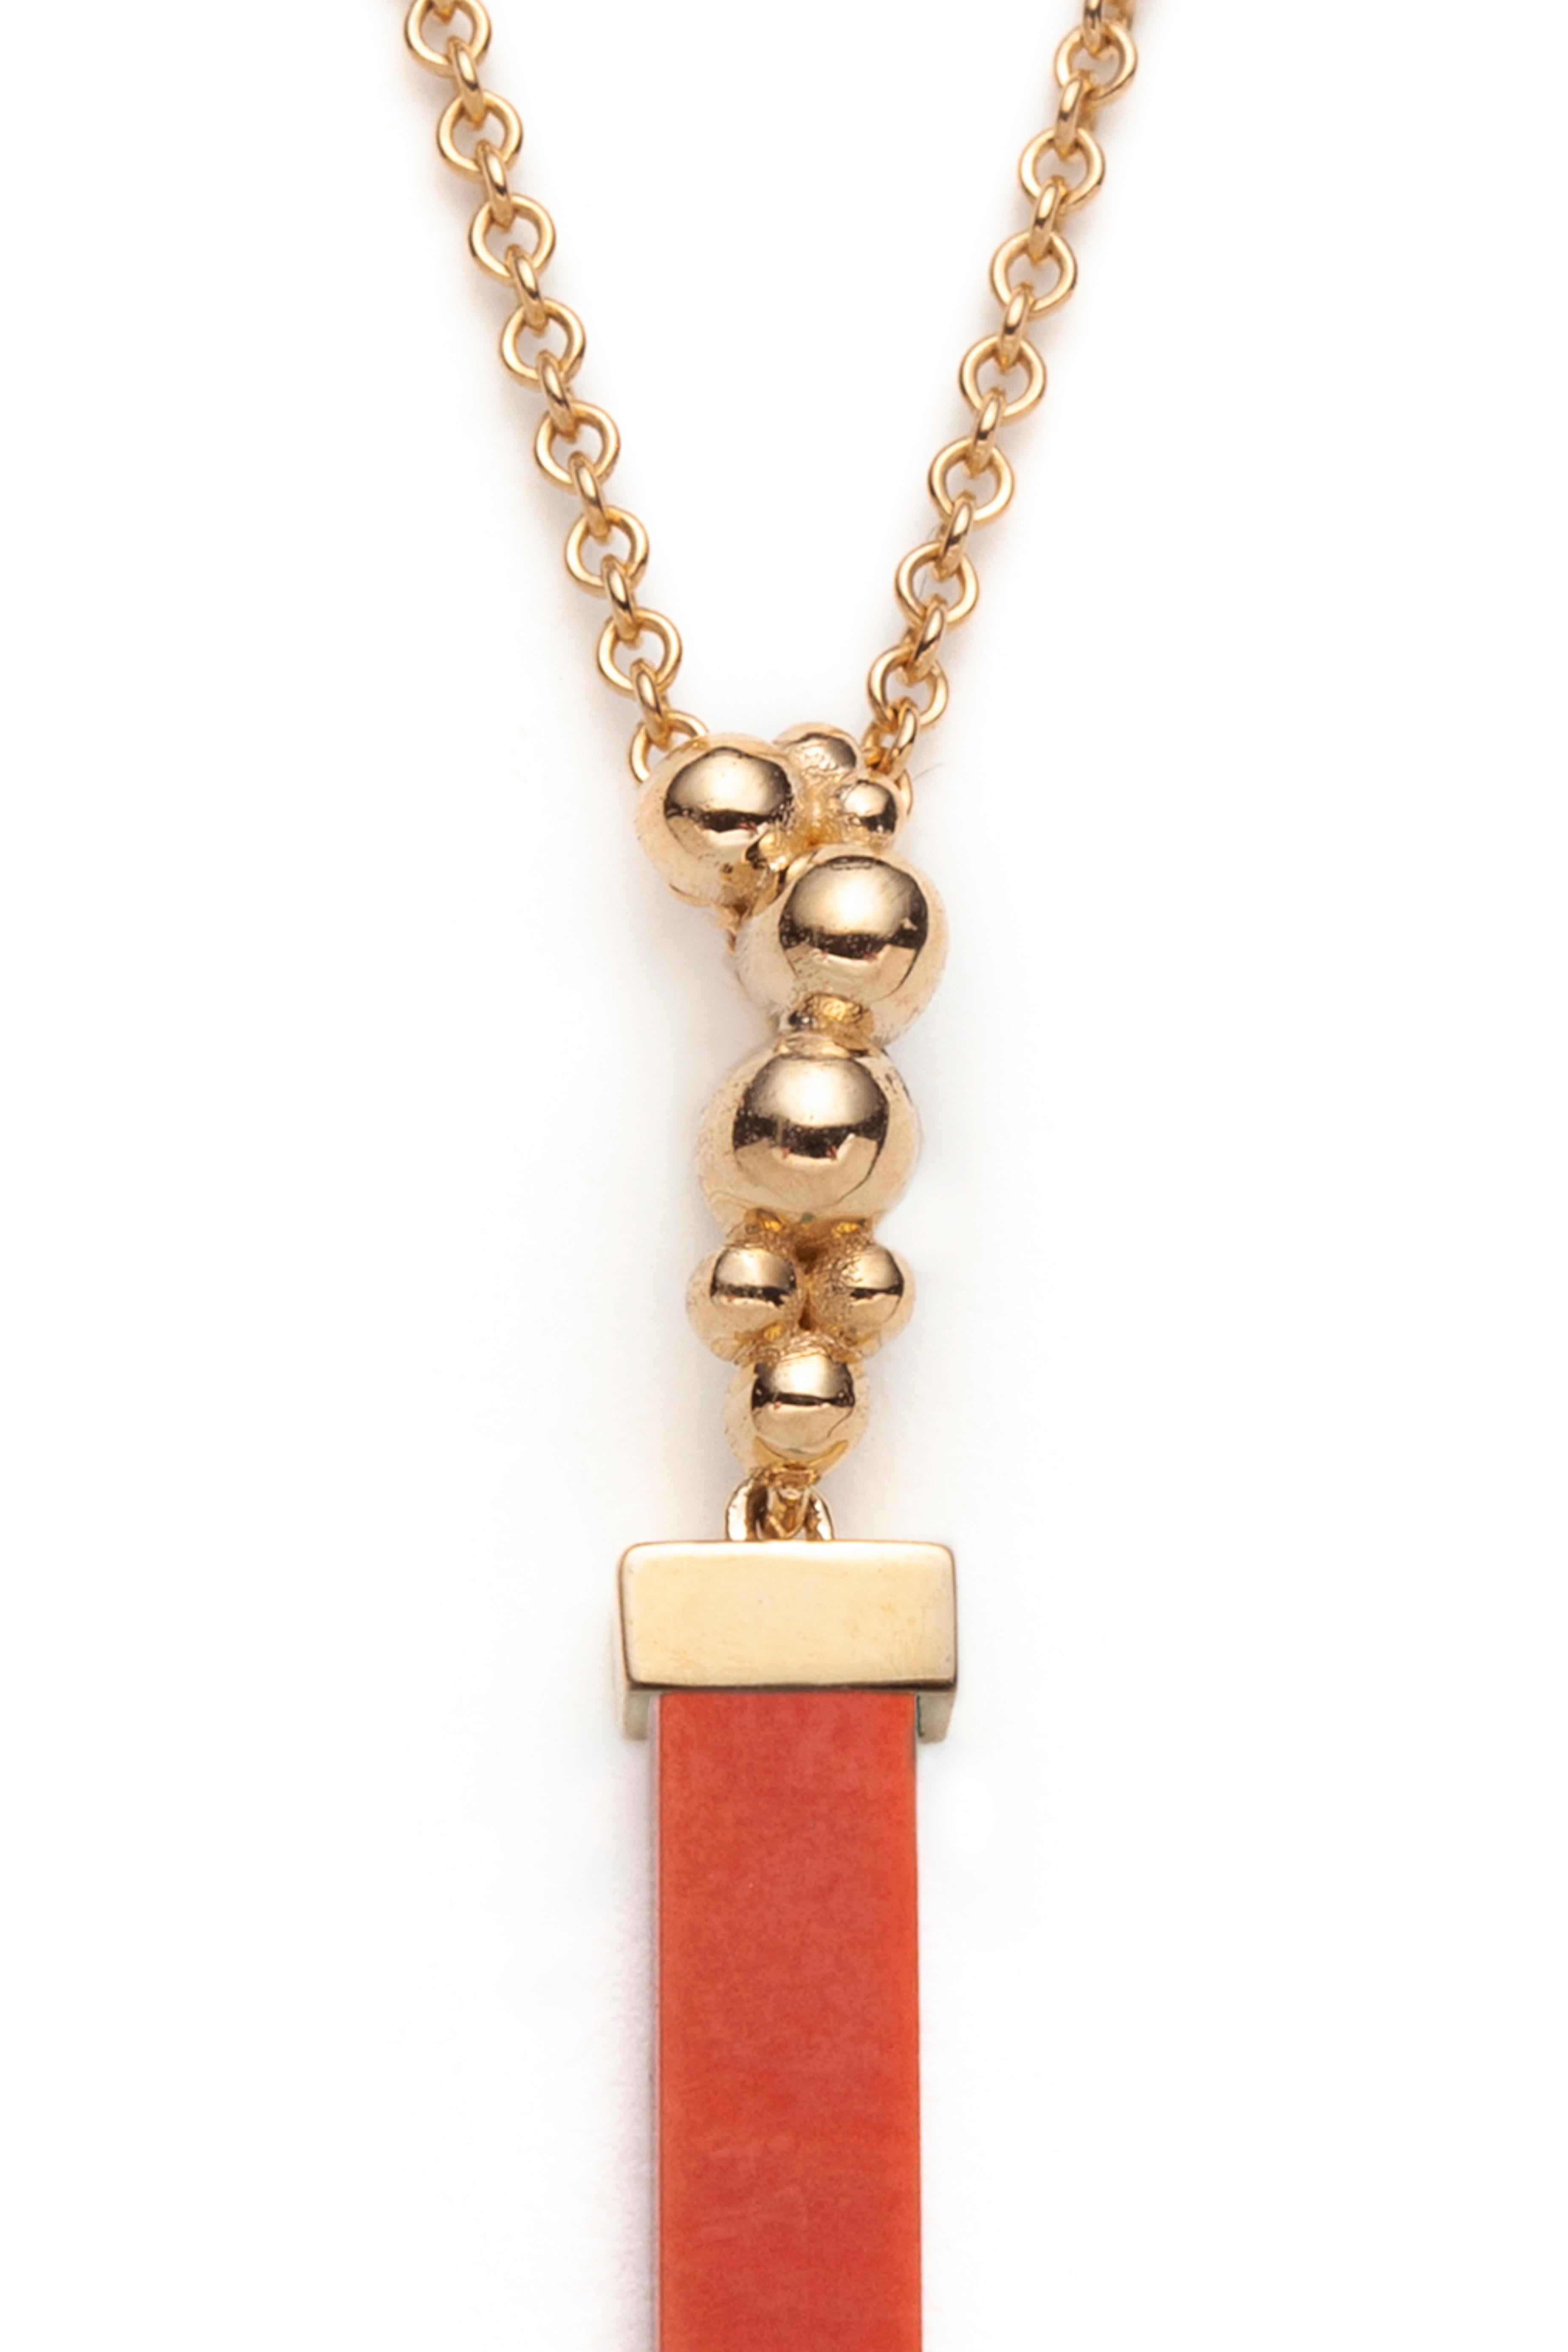 We make this colorful pendant in 14k yellow gold set with a rectangular Coral batons and a citrine teardrop. The pendant length is 42mm. The 18